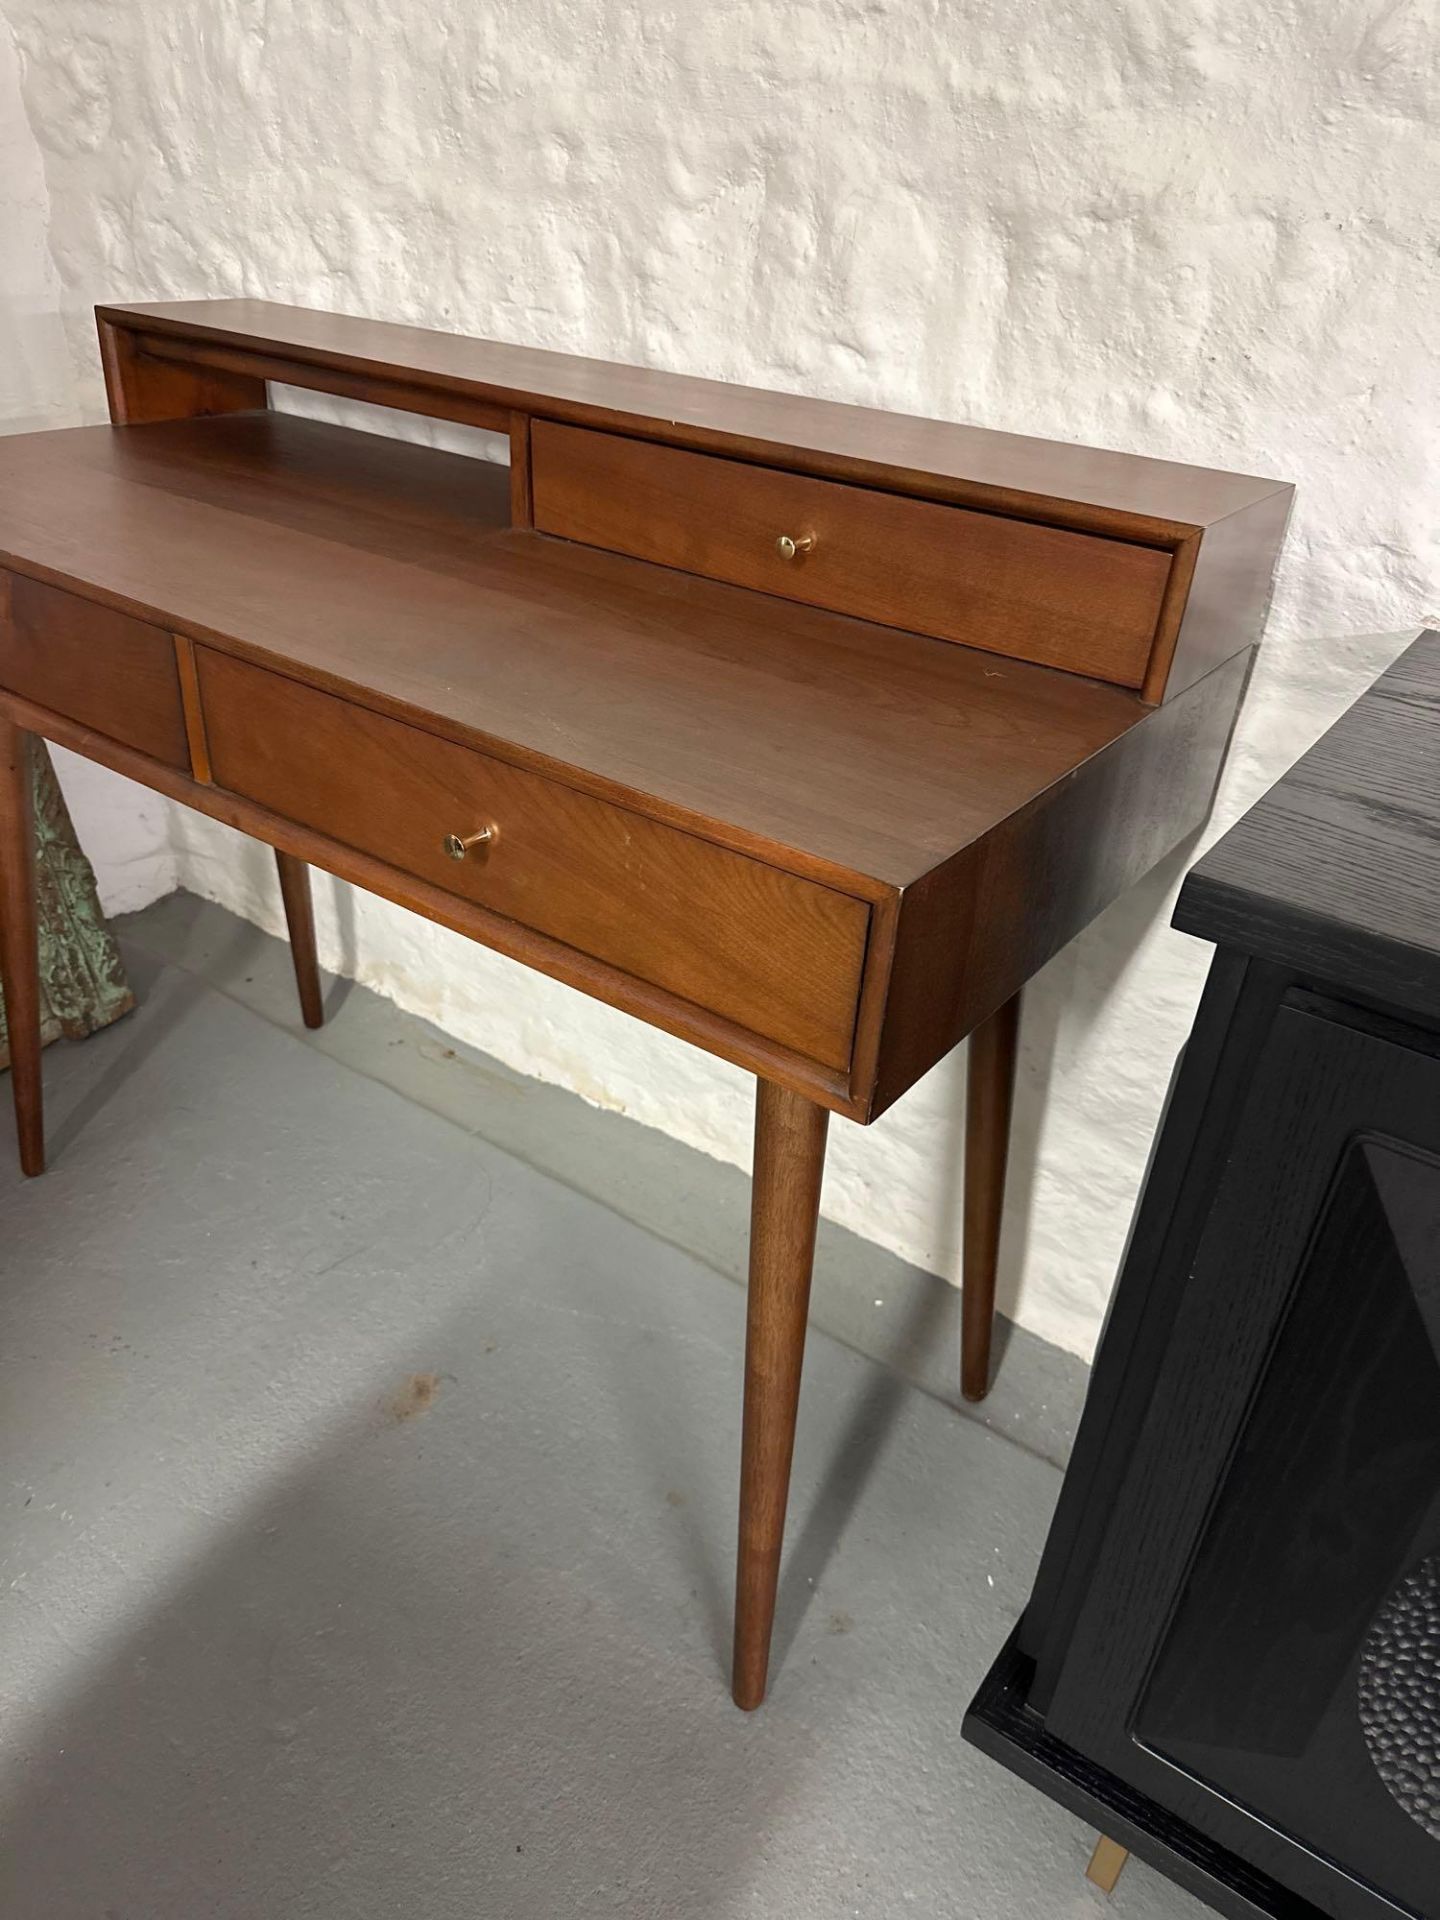 Bailey Desk and Stool Stylish deep brown tones and a smooth finish make this dressing table/desk - Image 3 of 11